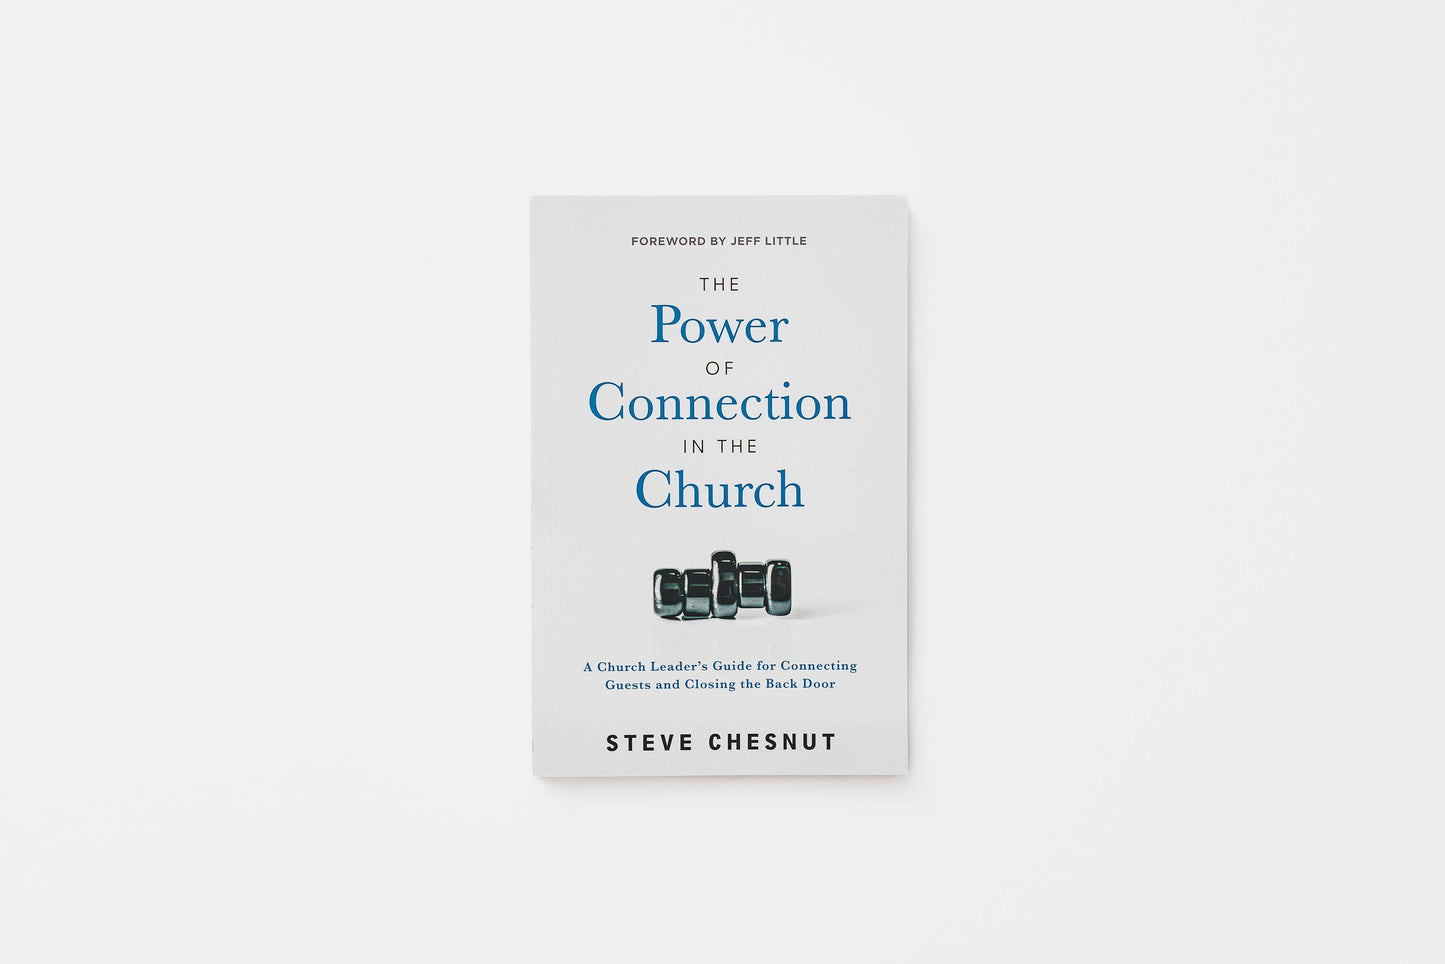 The Power of Connection in the Church